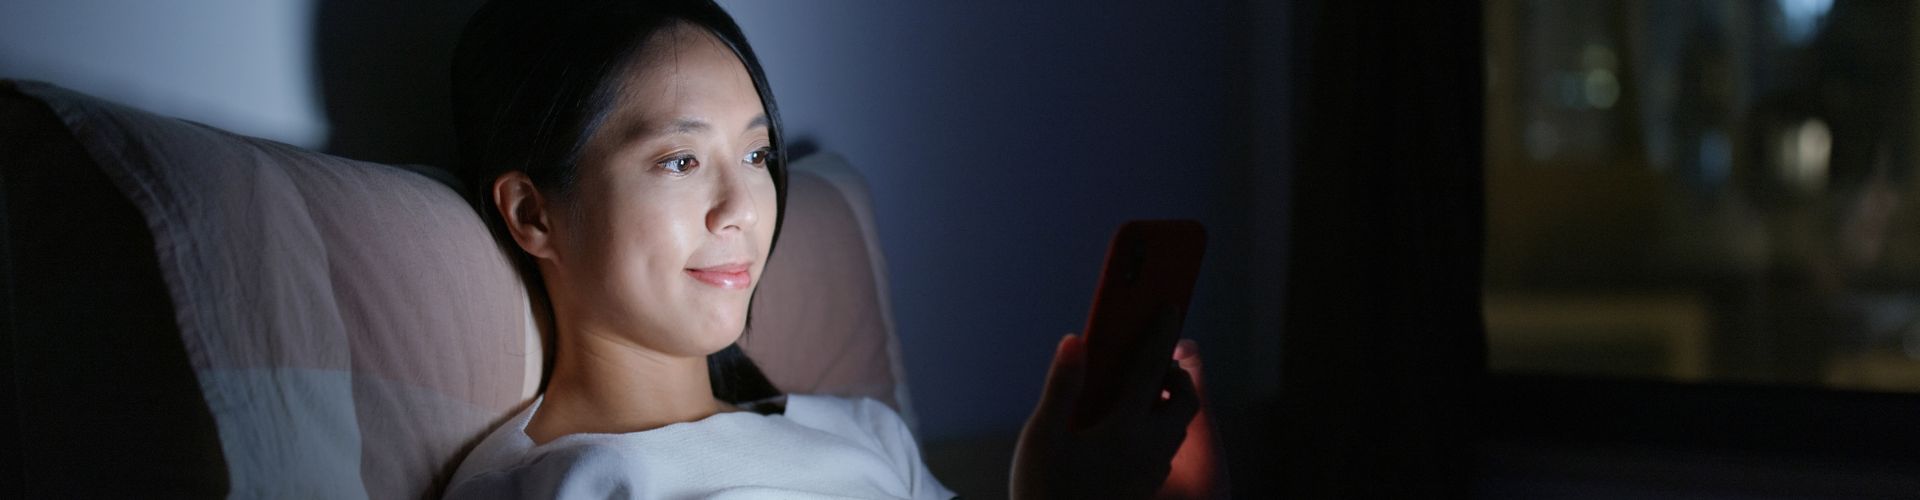 Woman Using Mobile Phone in Bed at Night